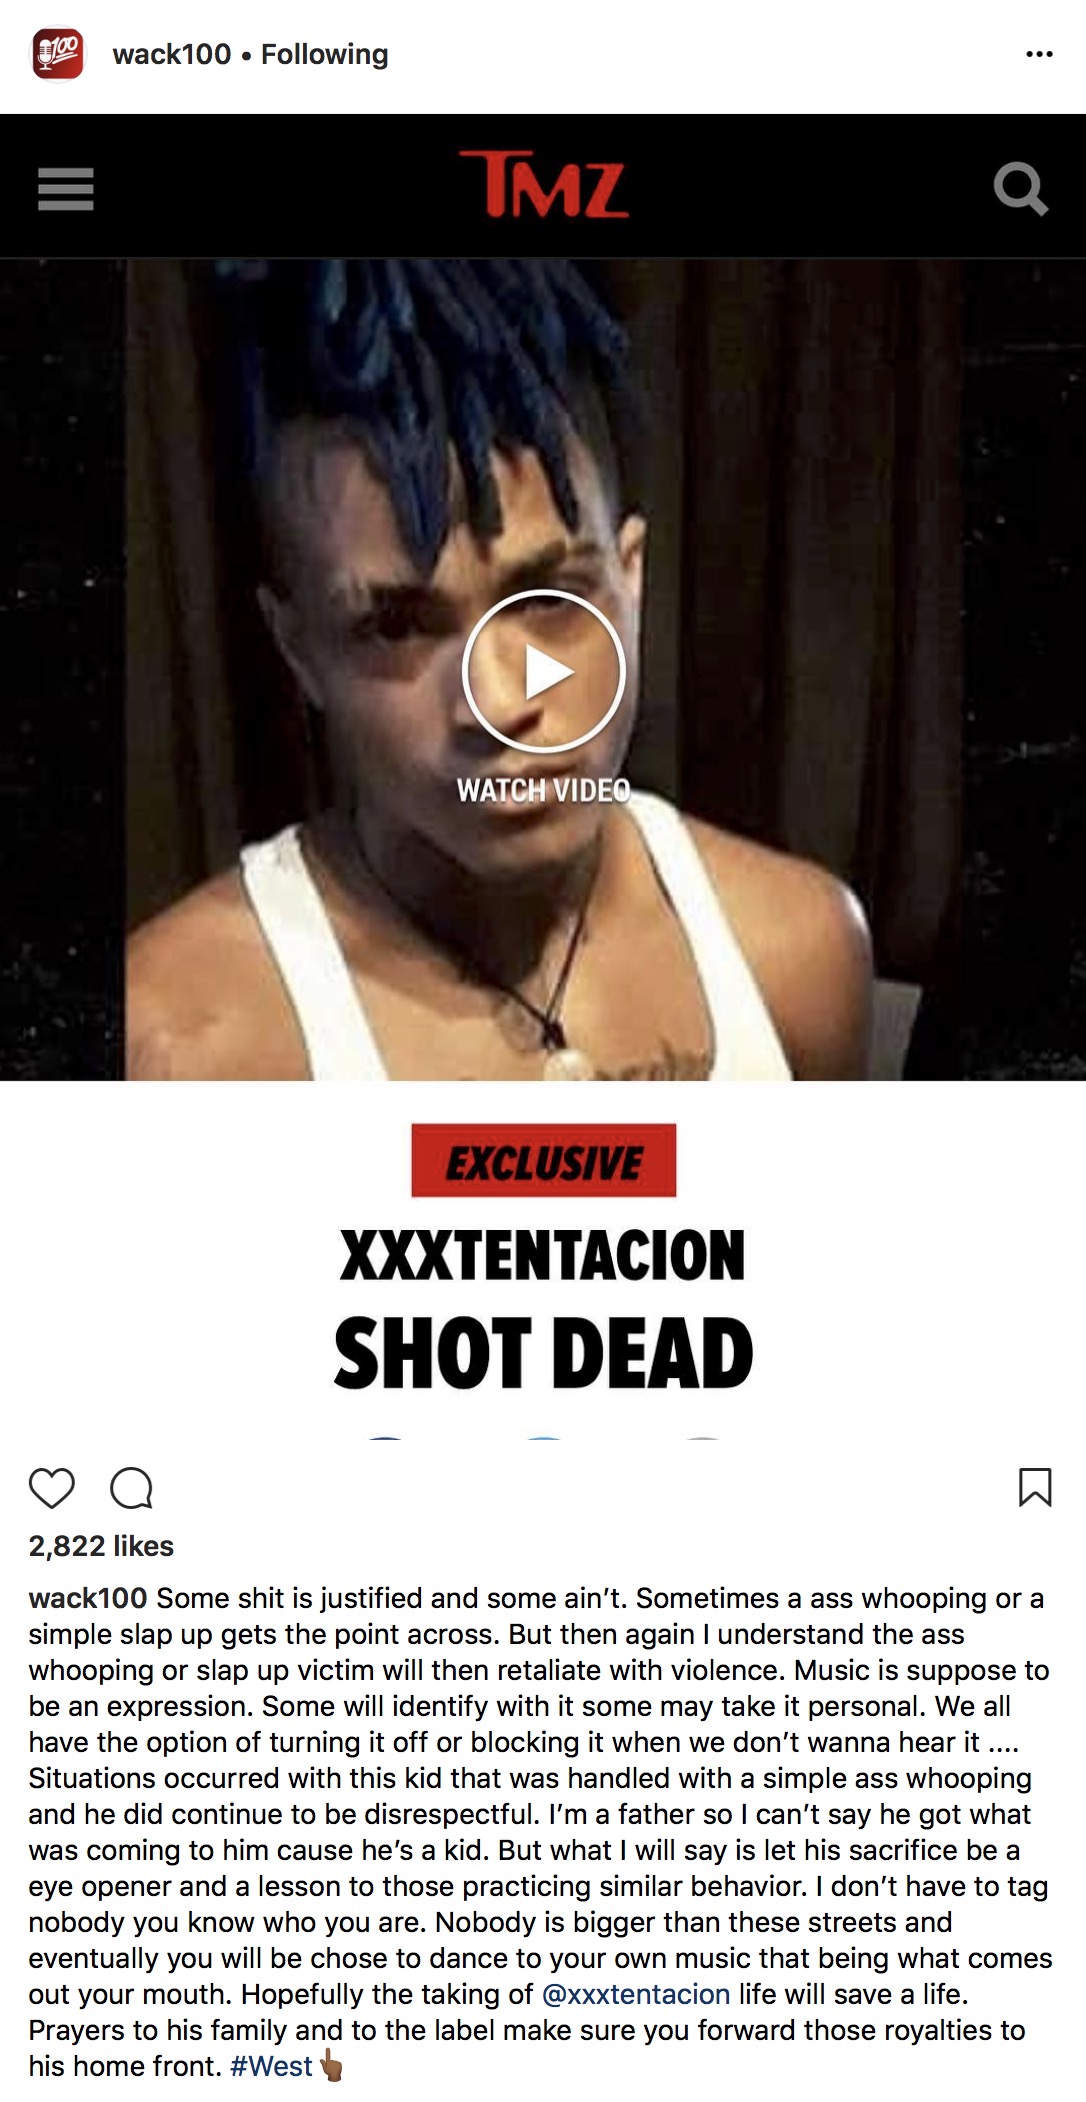 Game&#039;s Manager Wack 100 Won&#039;t Honor XXXTentacion&#039;s Life: &quot;He Did Continue To Be Disrespectful&quot; &ndash;